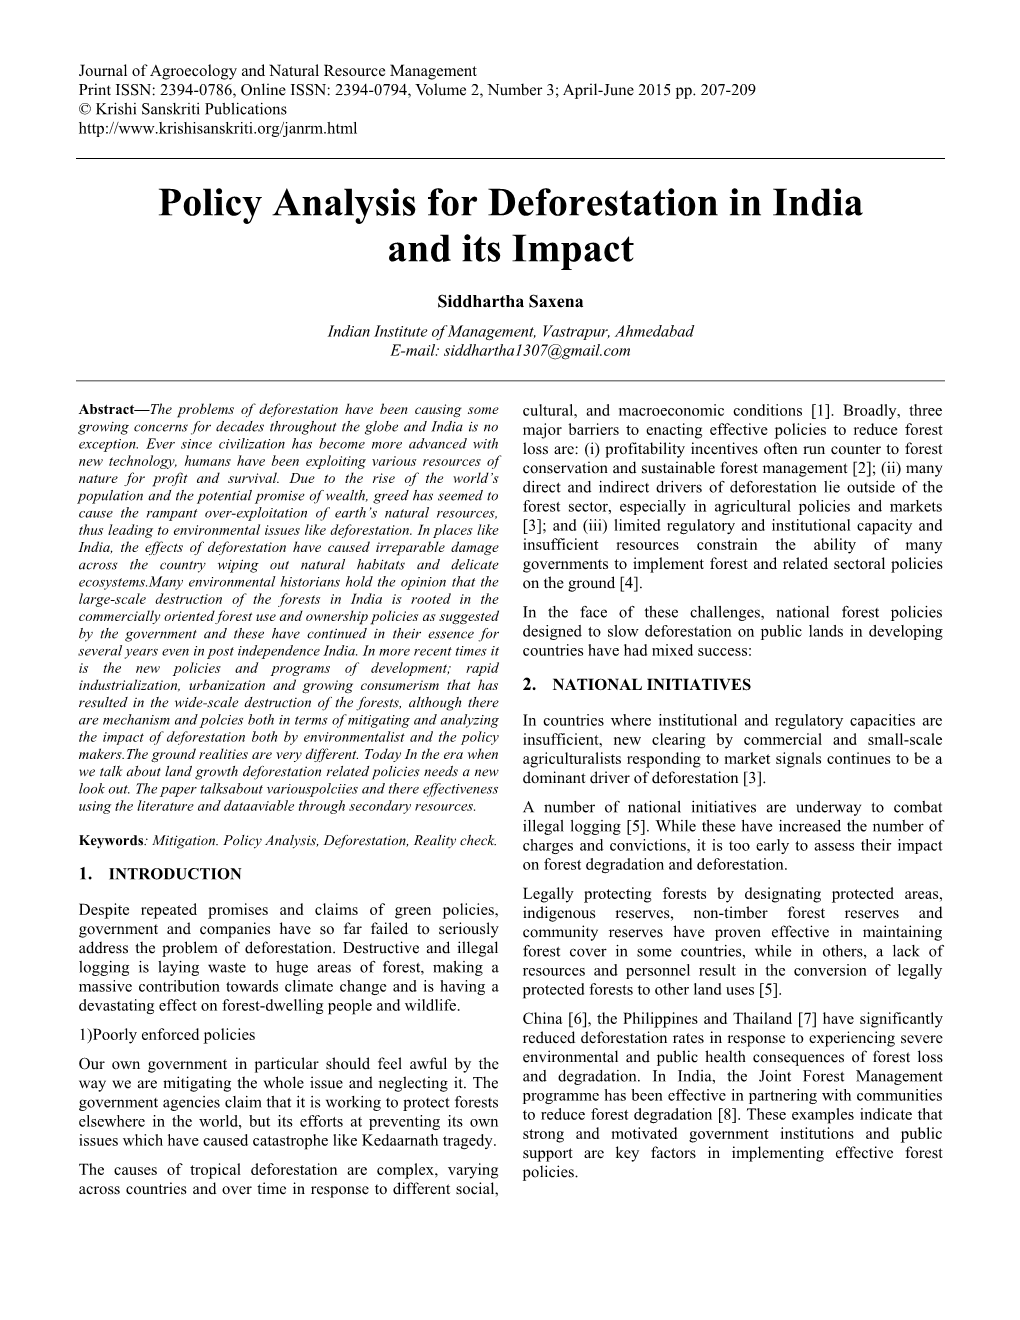 Policy Analysis for Deforestation in India and Its Impact